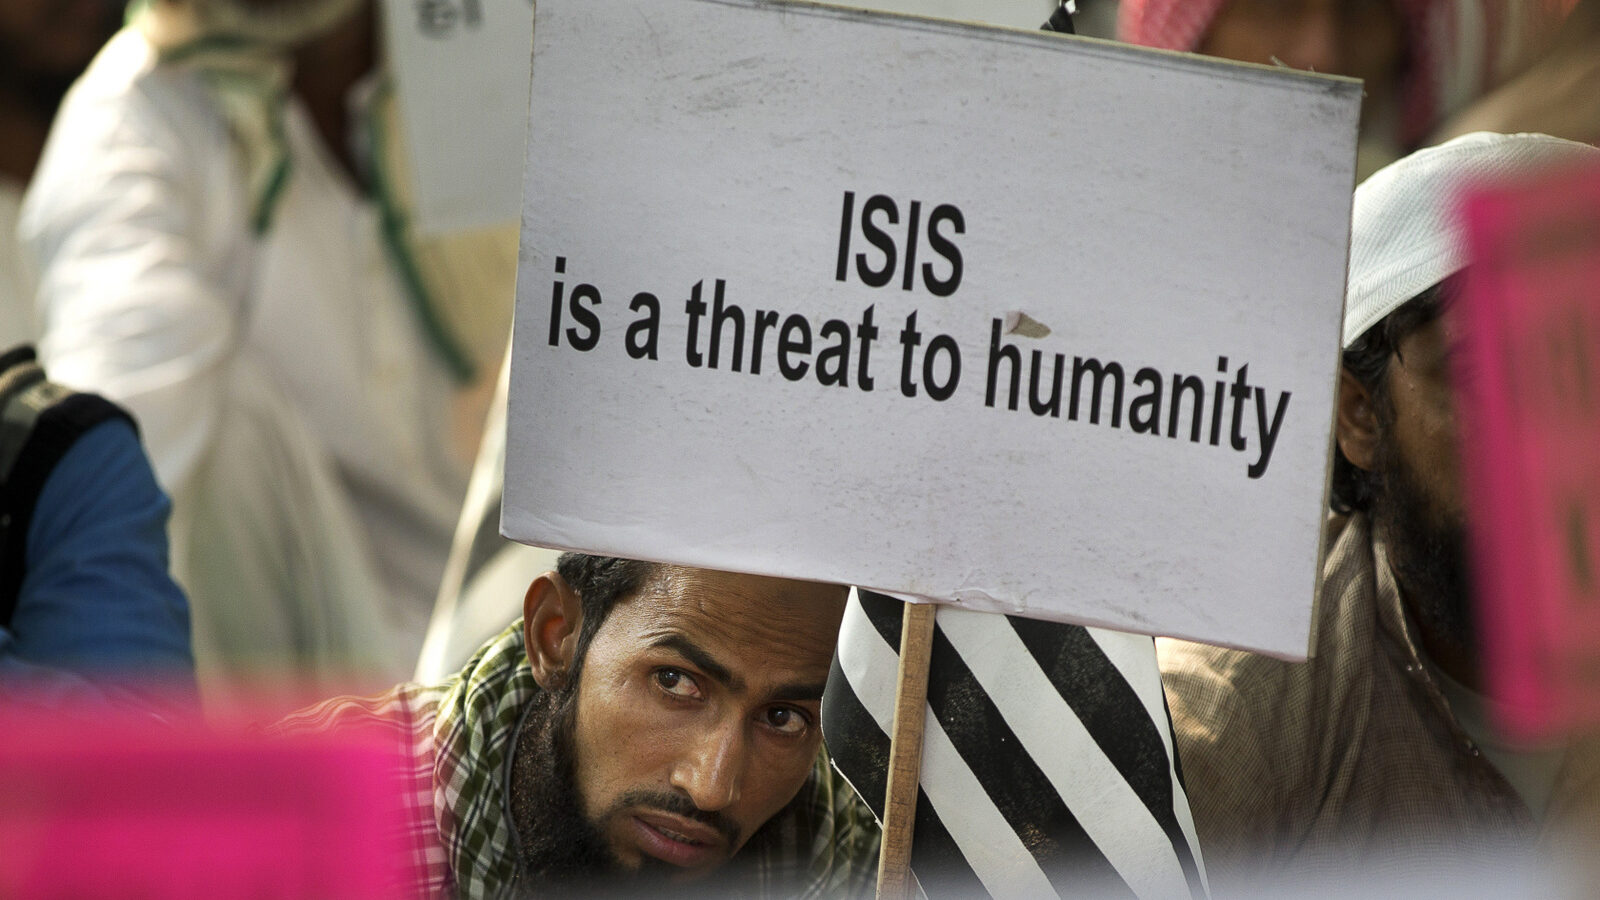 An Indian Muslim man holds a banner during a protest against ISIS, an Islamic State group, and Friday's Paris attacks, in New Delhi, India, Wednesday, Nov. 18, 2015. (AP Photo/Manish Swarup)